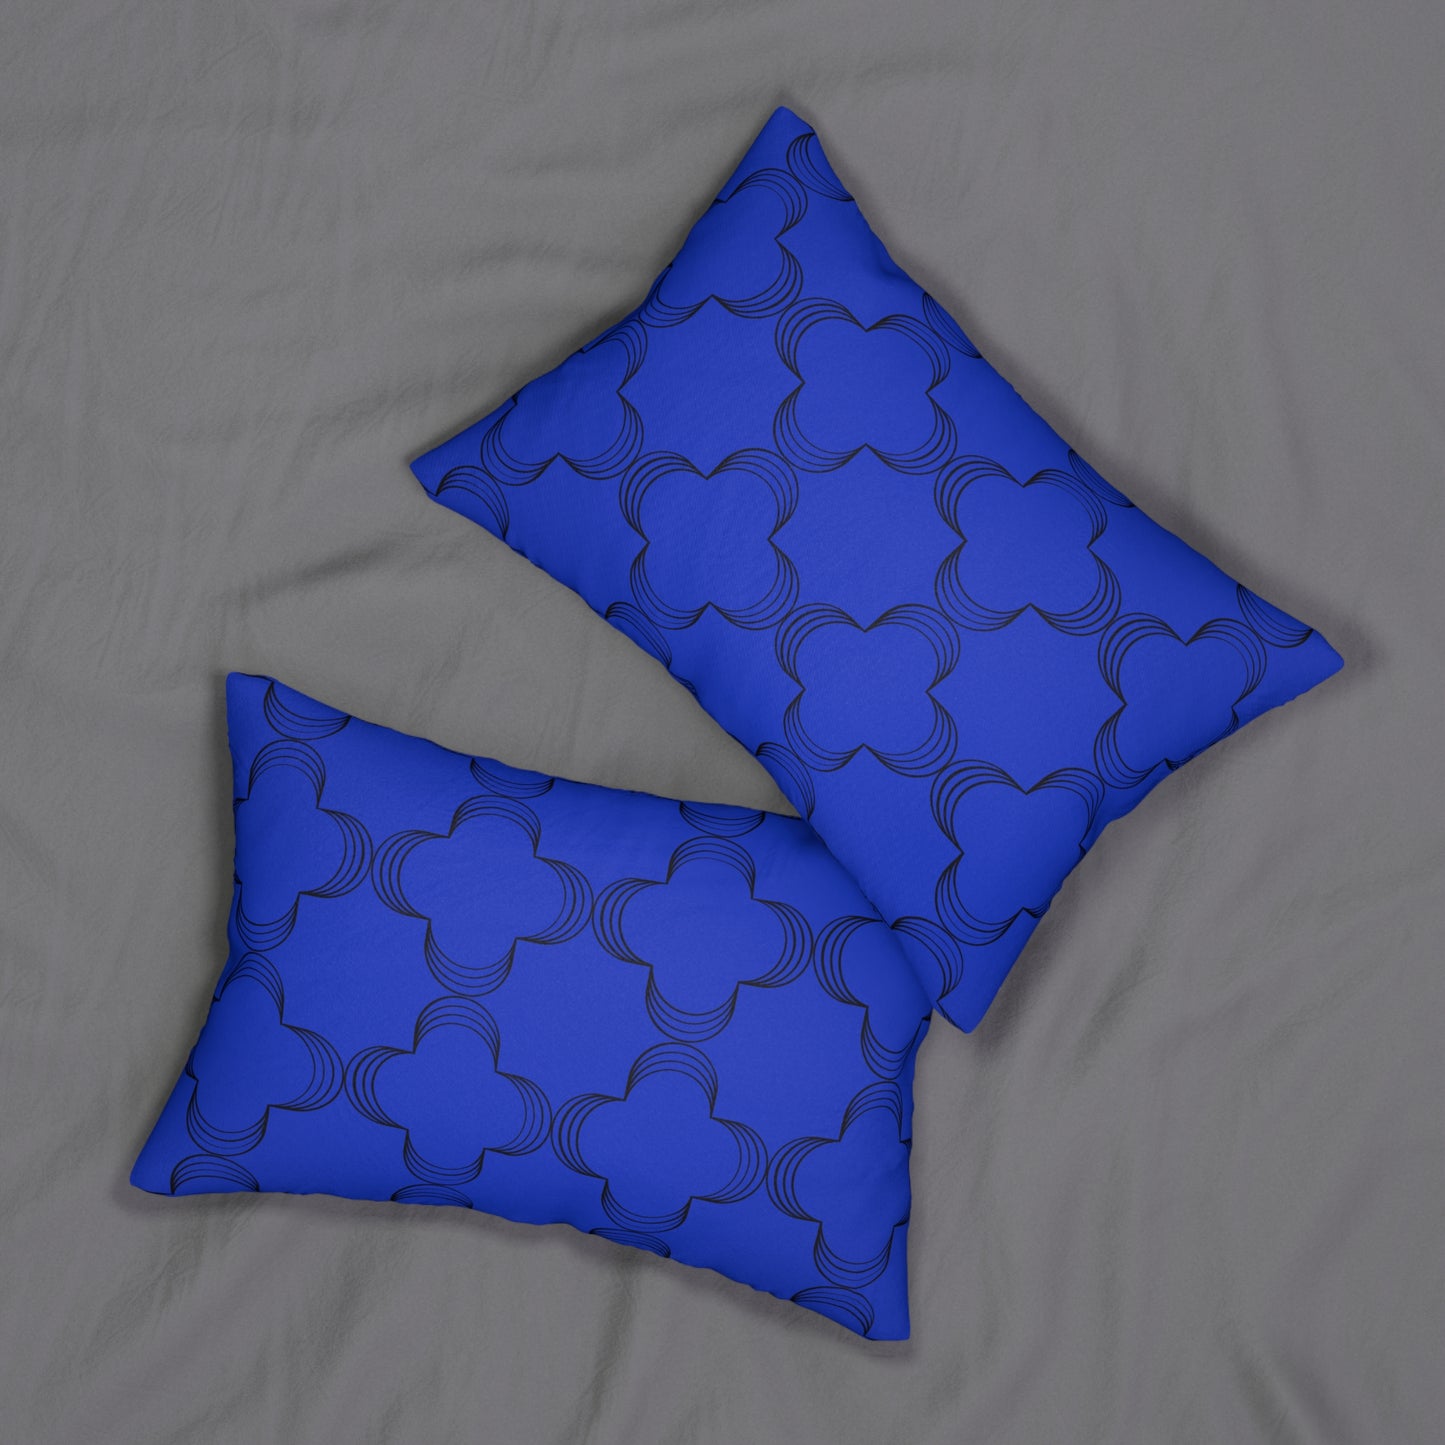 Geometric Colbalt (Matching The Gathering Place) Accent Pillow